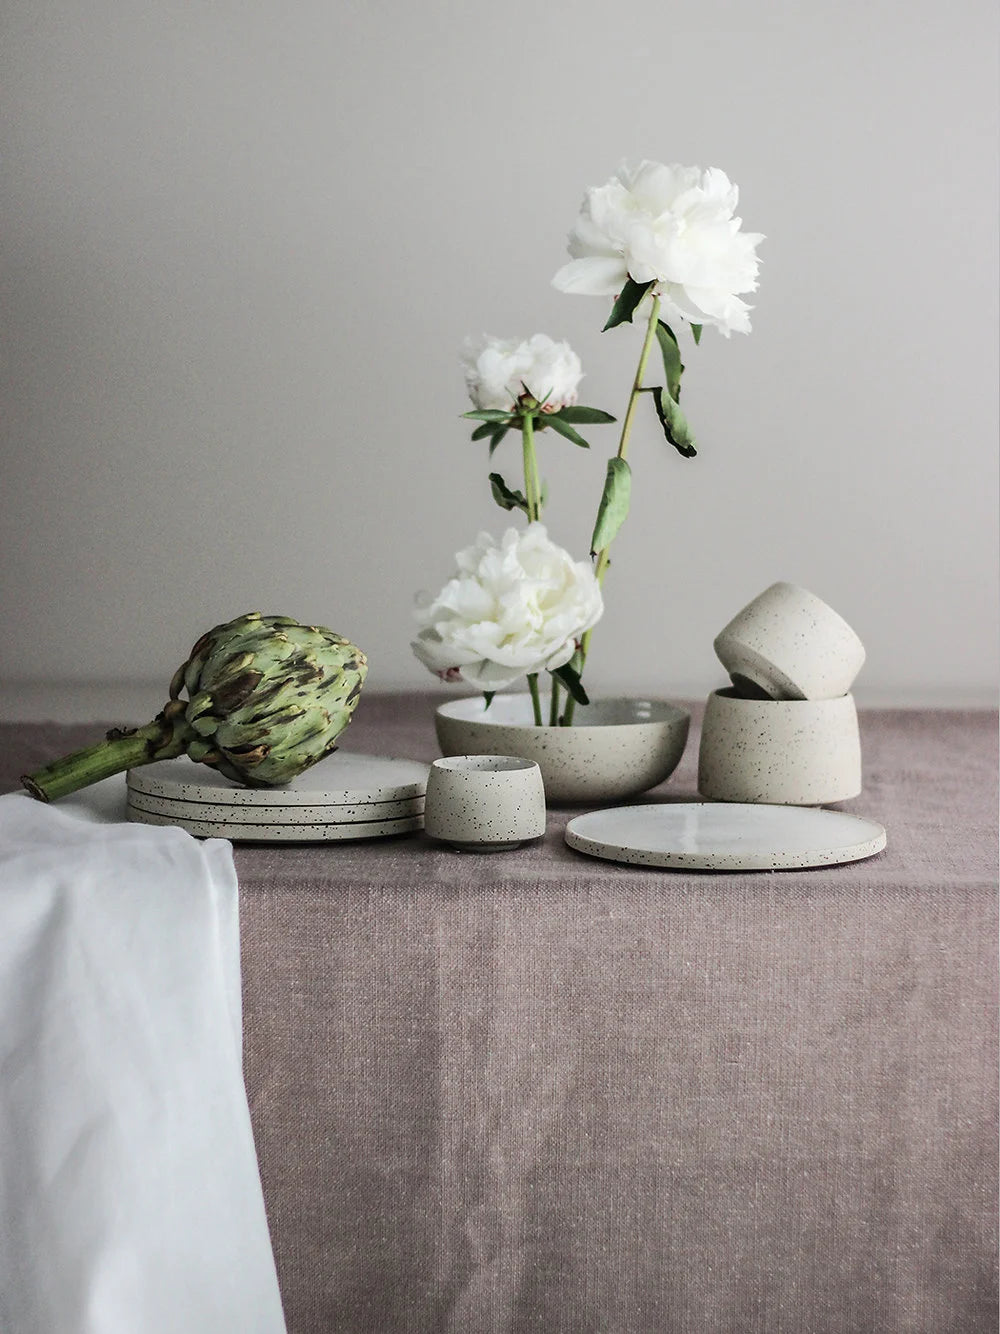 The Serif Ceramic Collection by Sandra Timmerman